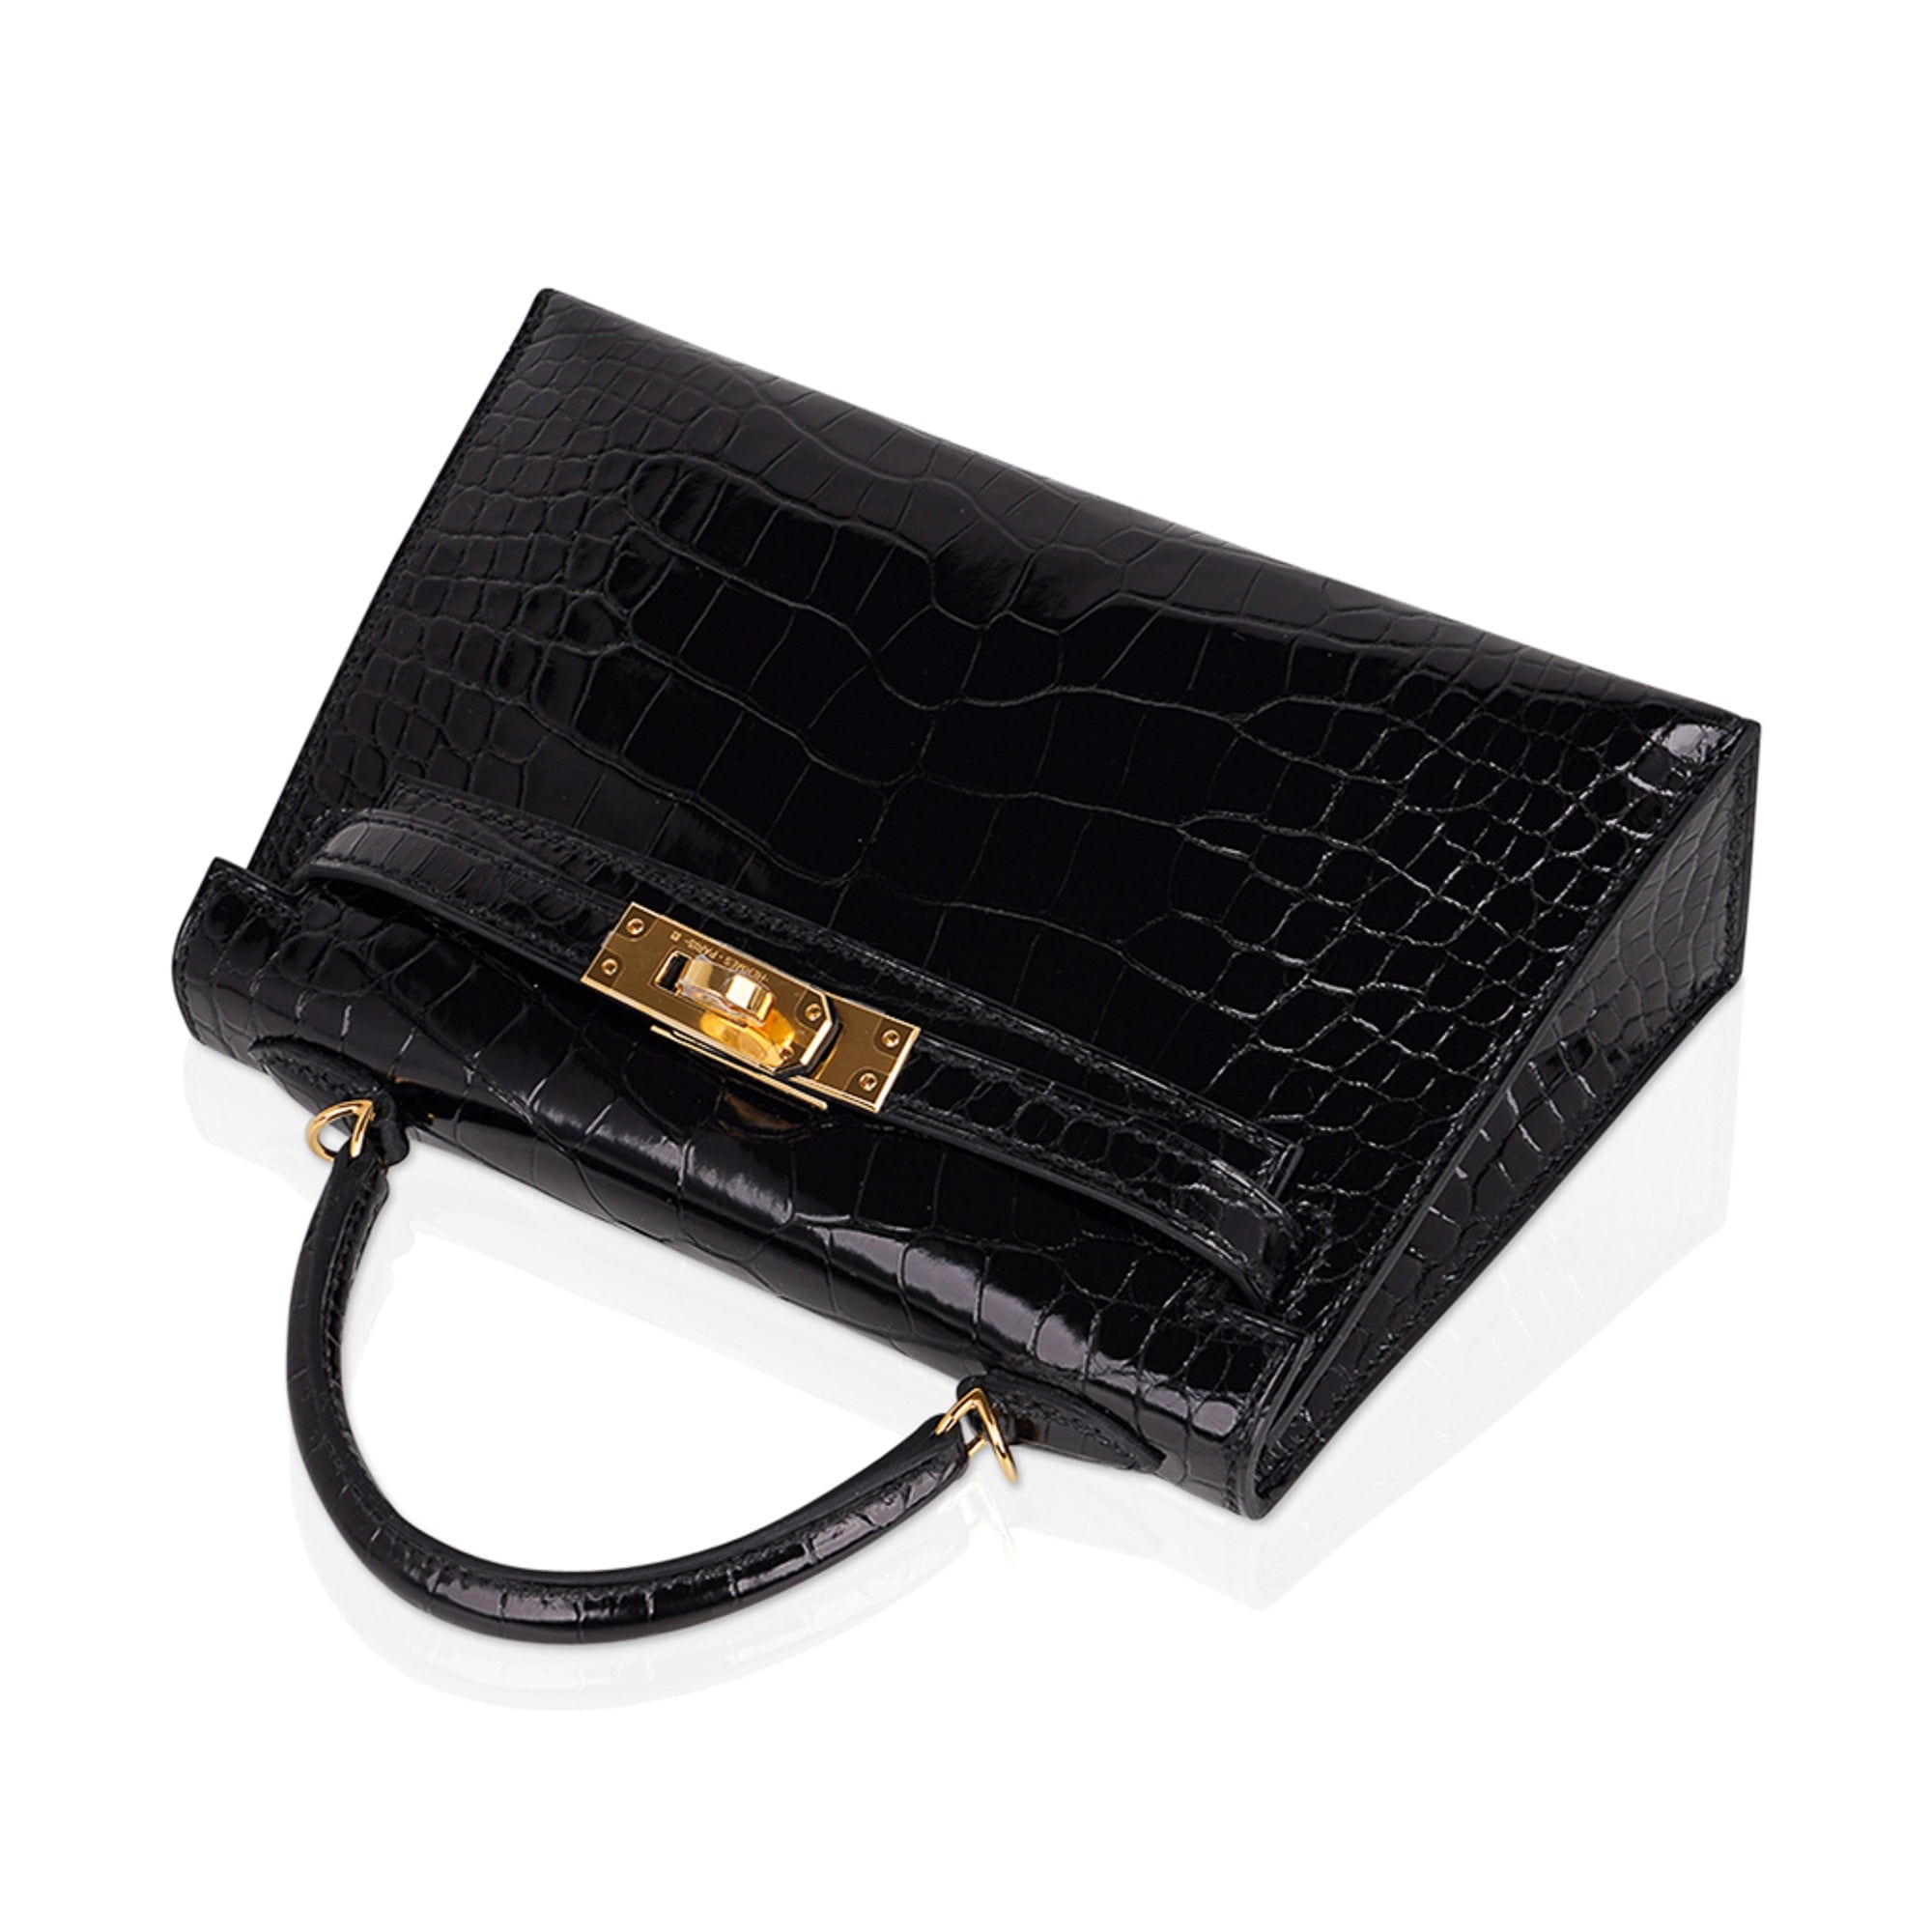 Hermès Kelly Long Ghillies Wallet of Black Shiny Mississippiensis Alligator  with Gold Hardware, Handbags & Accessories Online, Ecommerce Retail